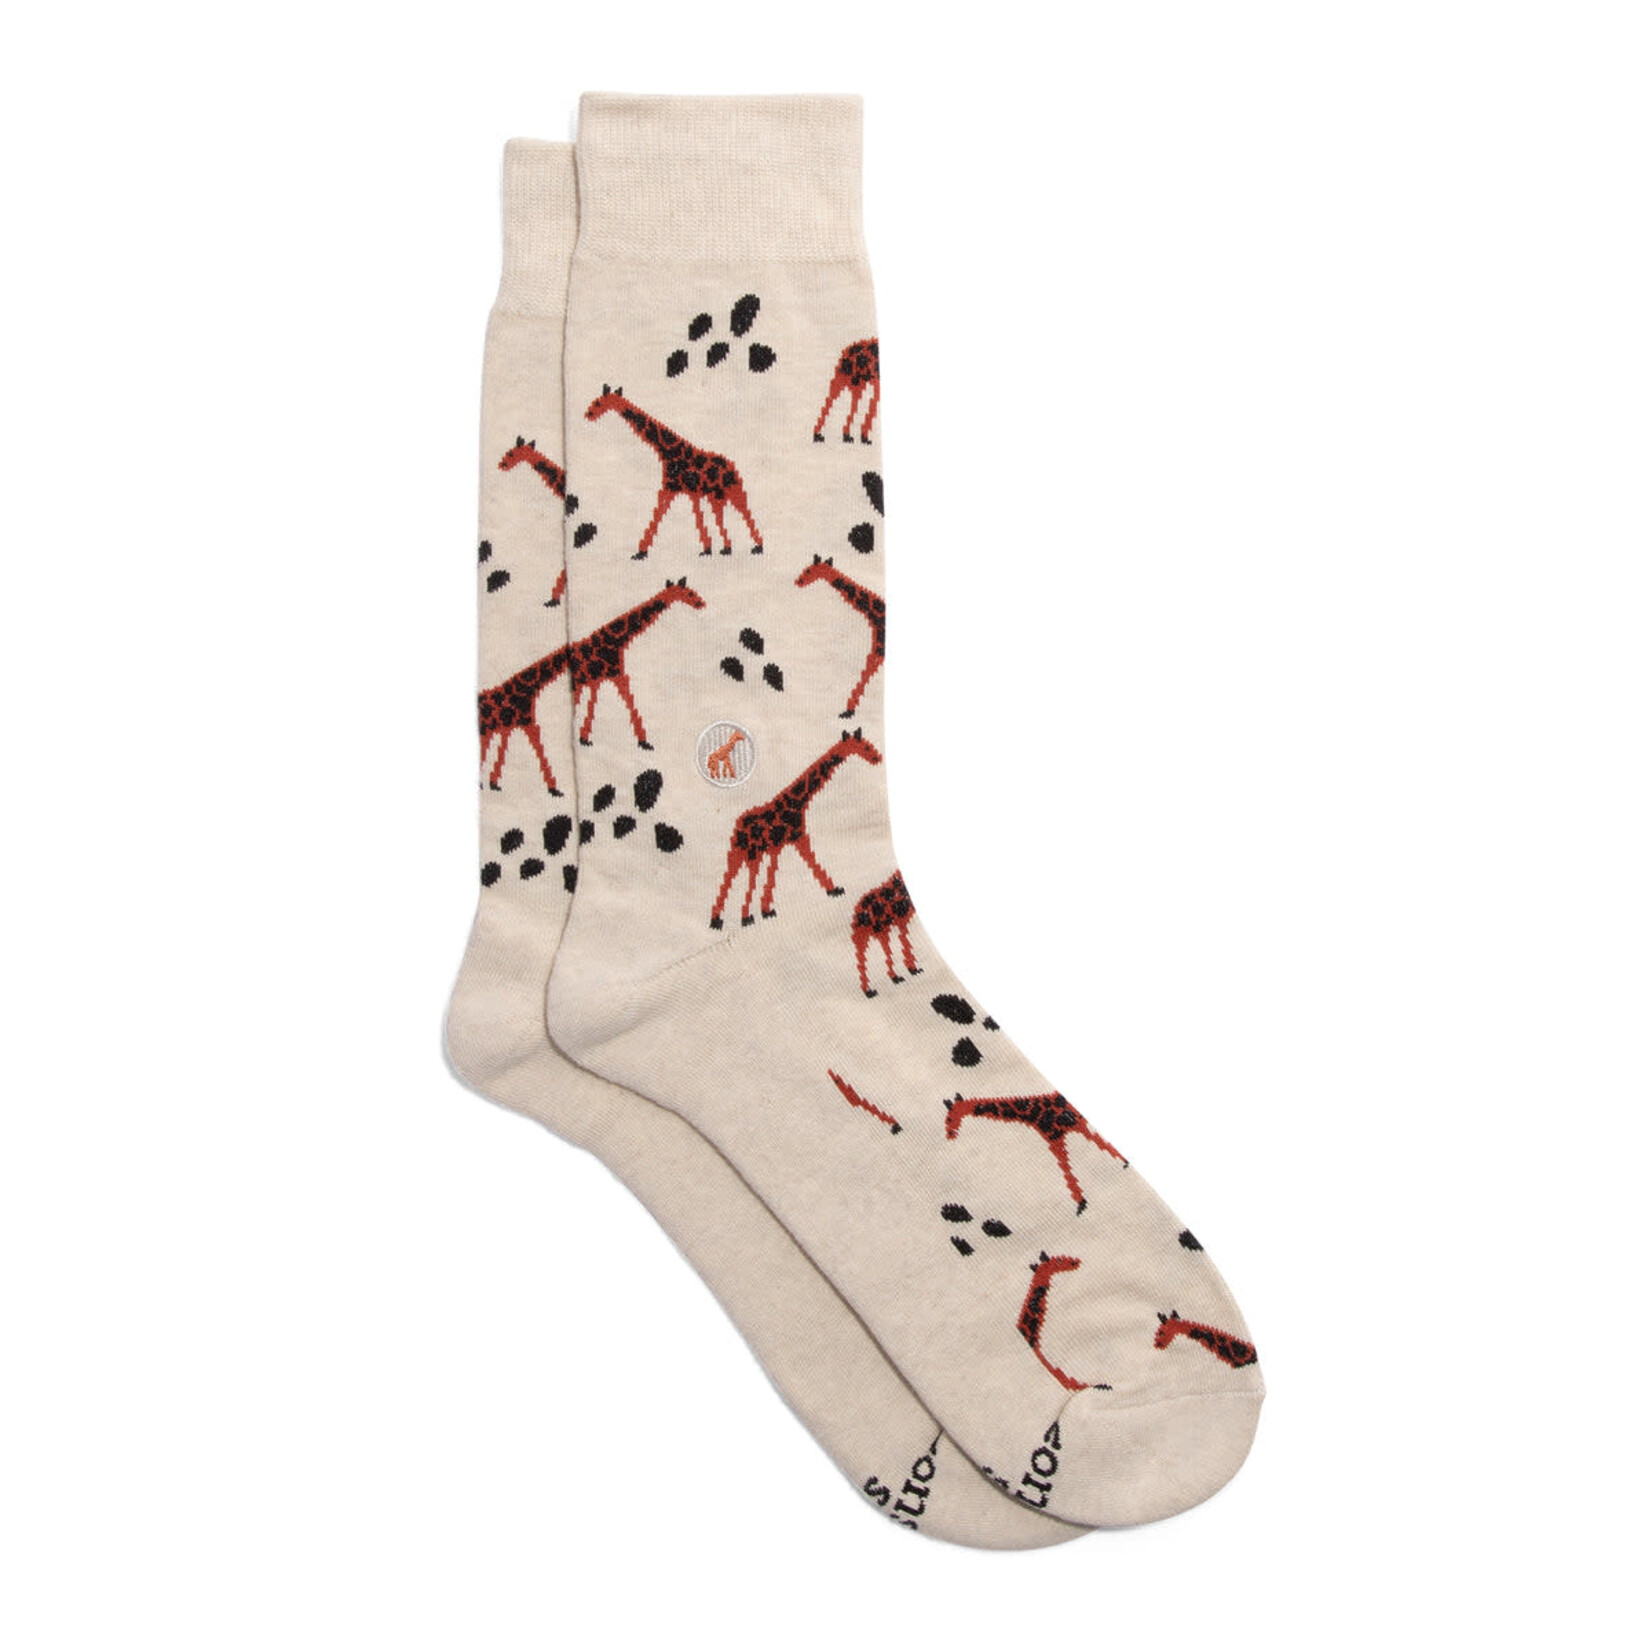 Conscious Step Conscious Step Socks that Protect Giraffes, Small